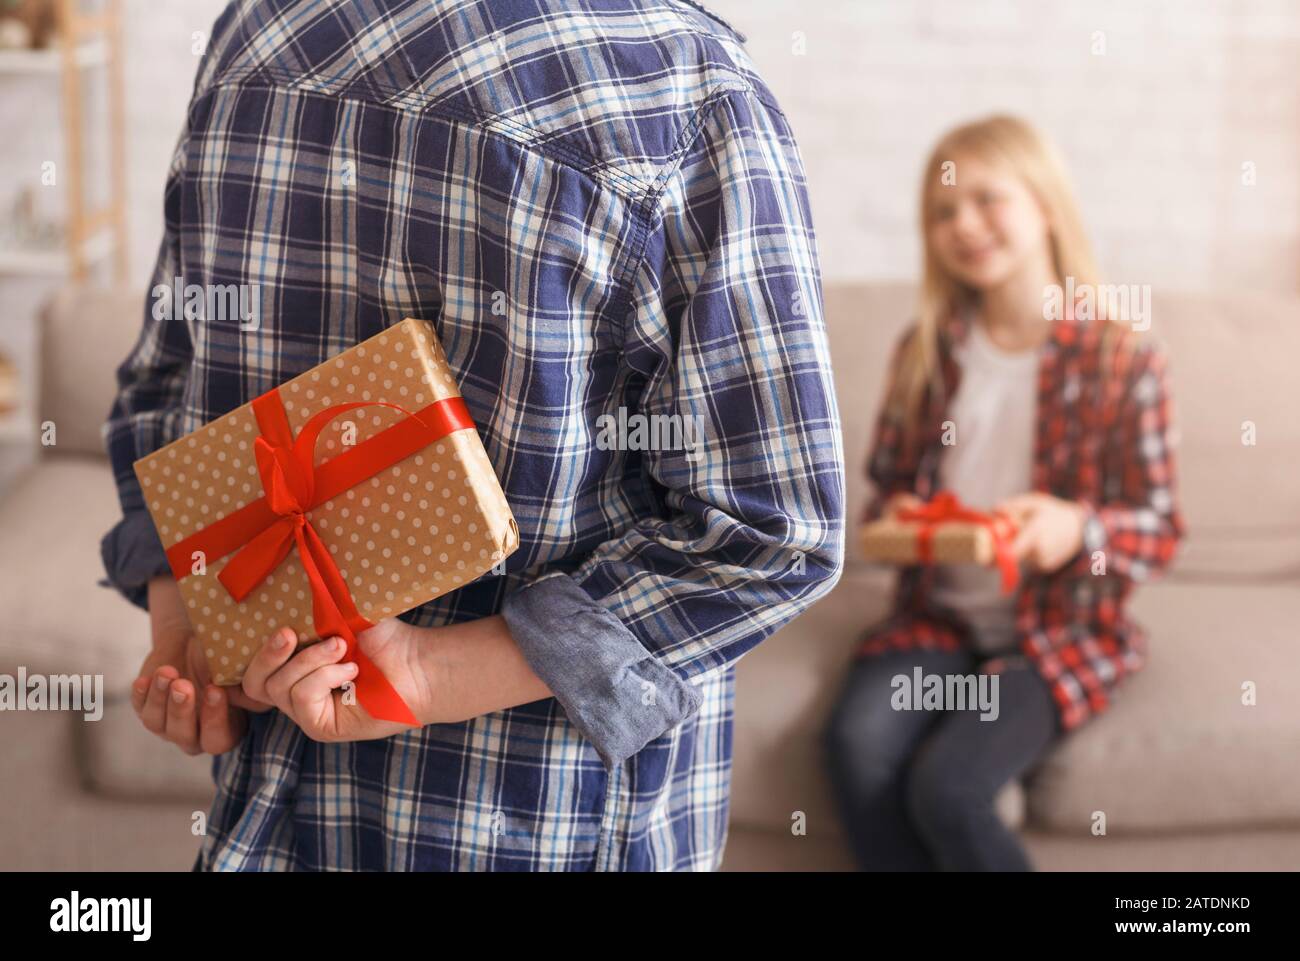 Unrecognizable Boy Holding Gift Congratulting Girl Sitting On Couch Indoor Stock Photo